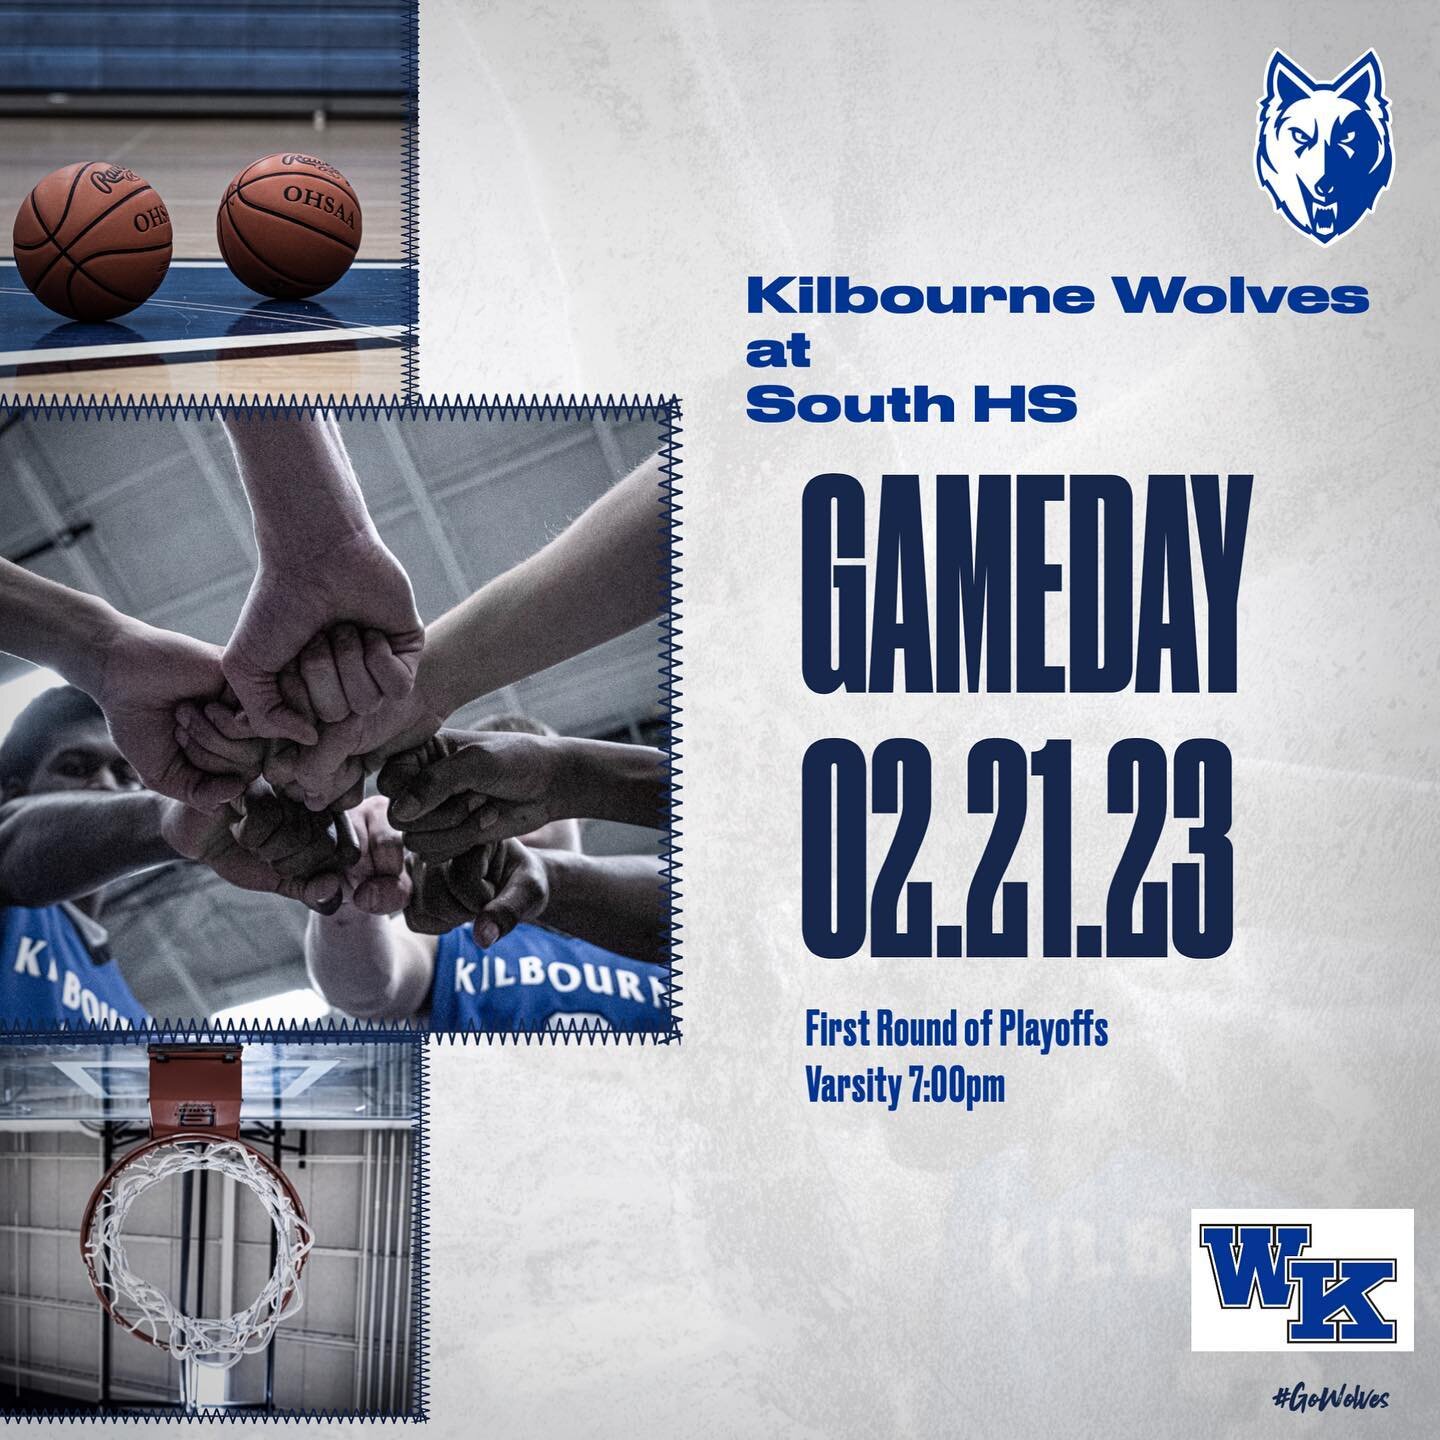 First round of playoffs TONIGHT! Wolves travel to South HS to take on those Bulldogs. Let&rsquo;s go Wolves!!